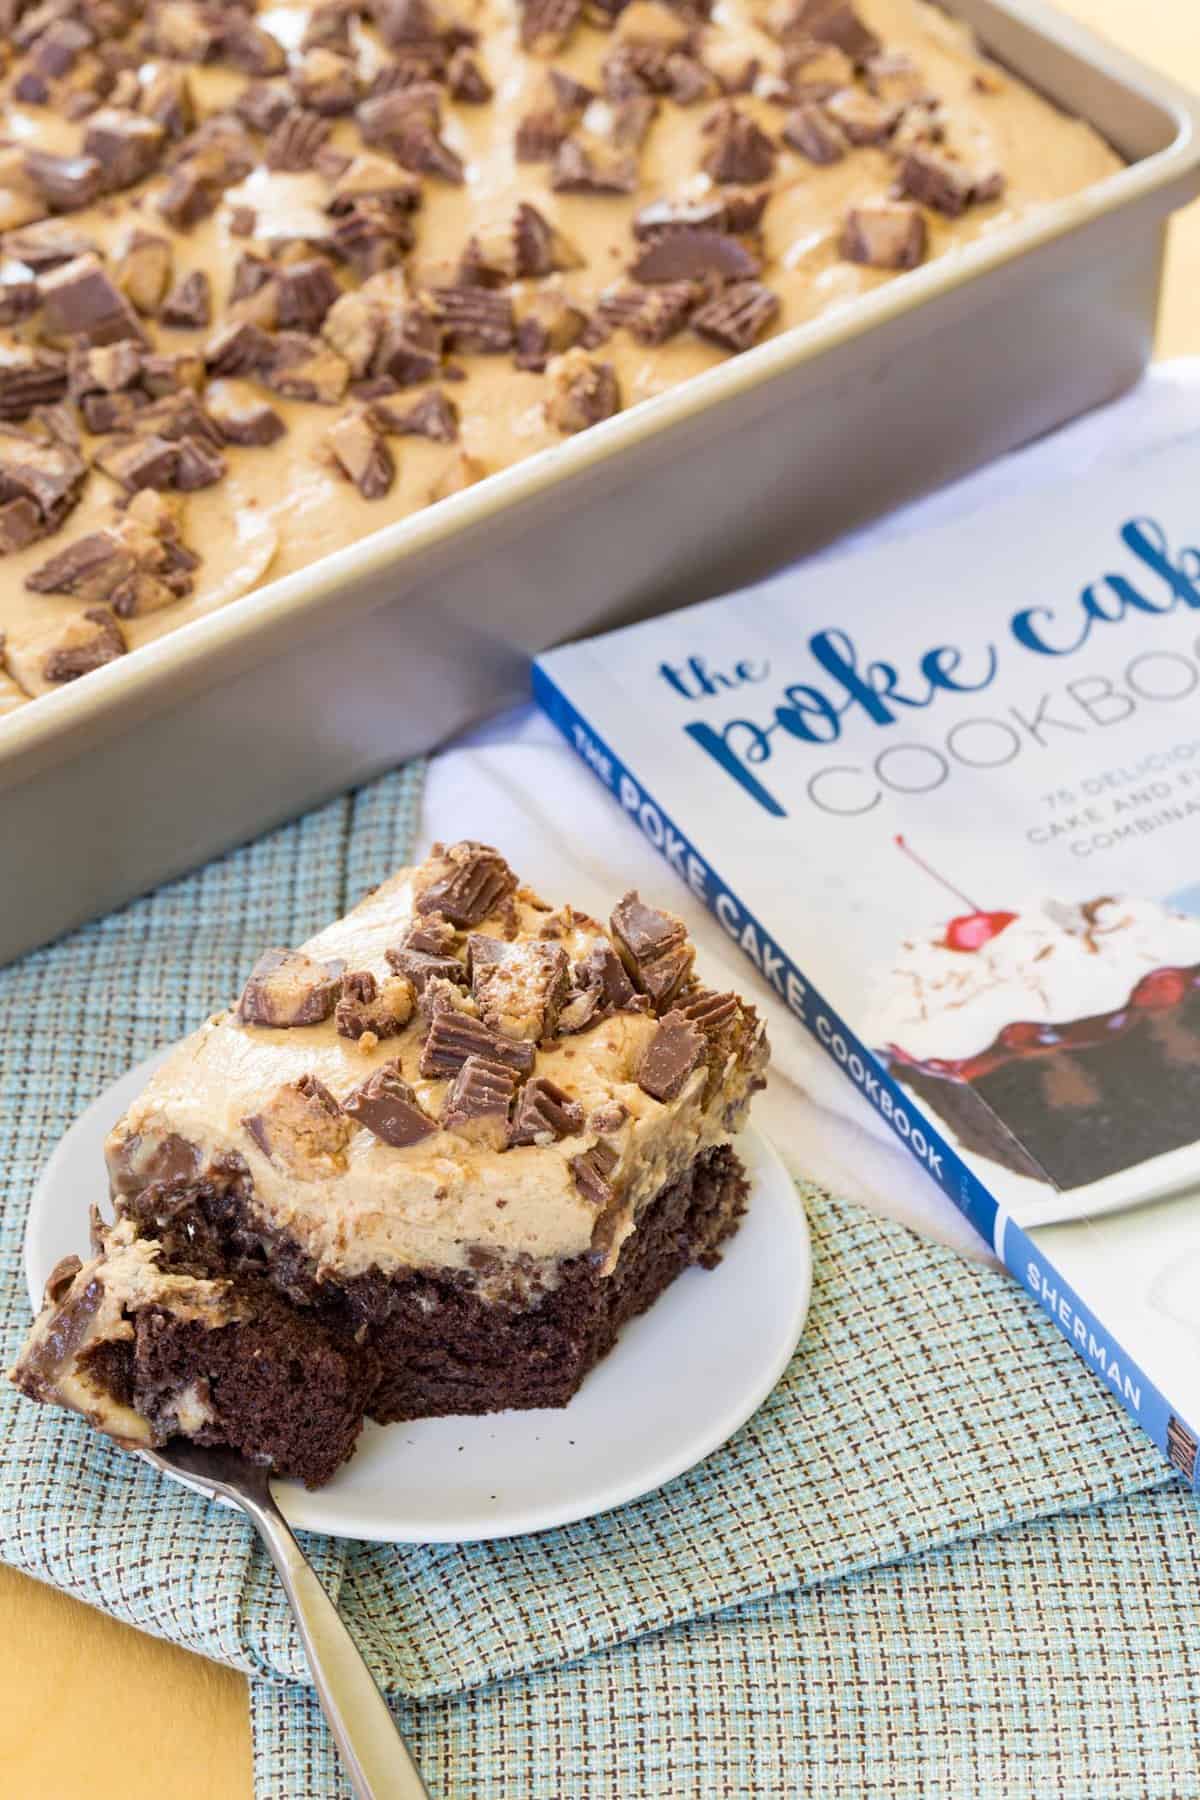 A piece of reese's cake on a plate next to the rest of the cake in a pan and a copy of The Poke Cake Cookbook.